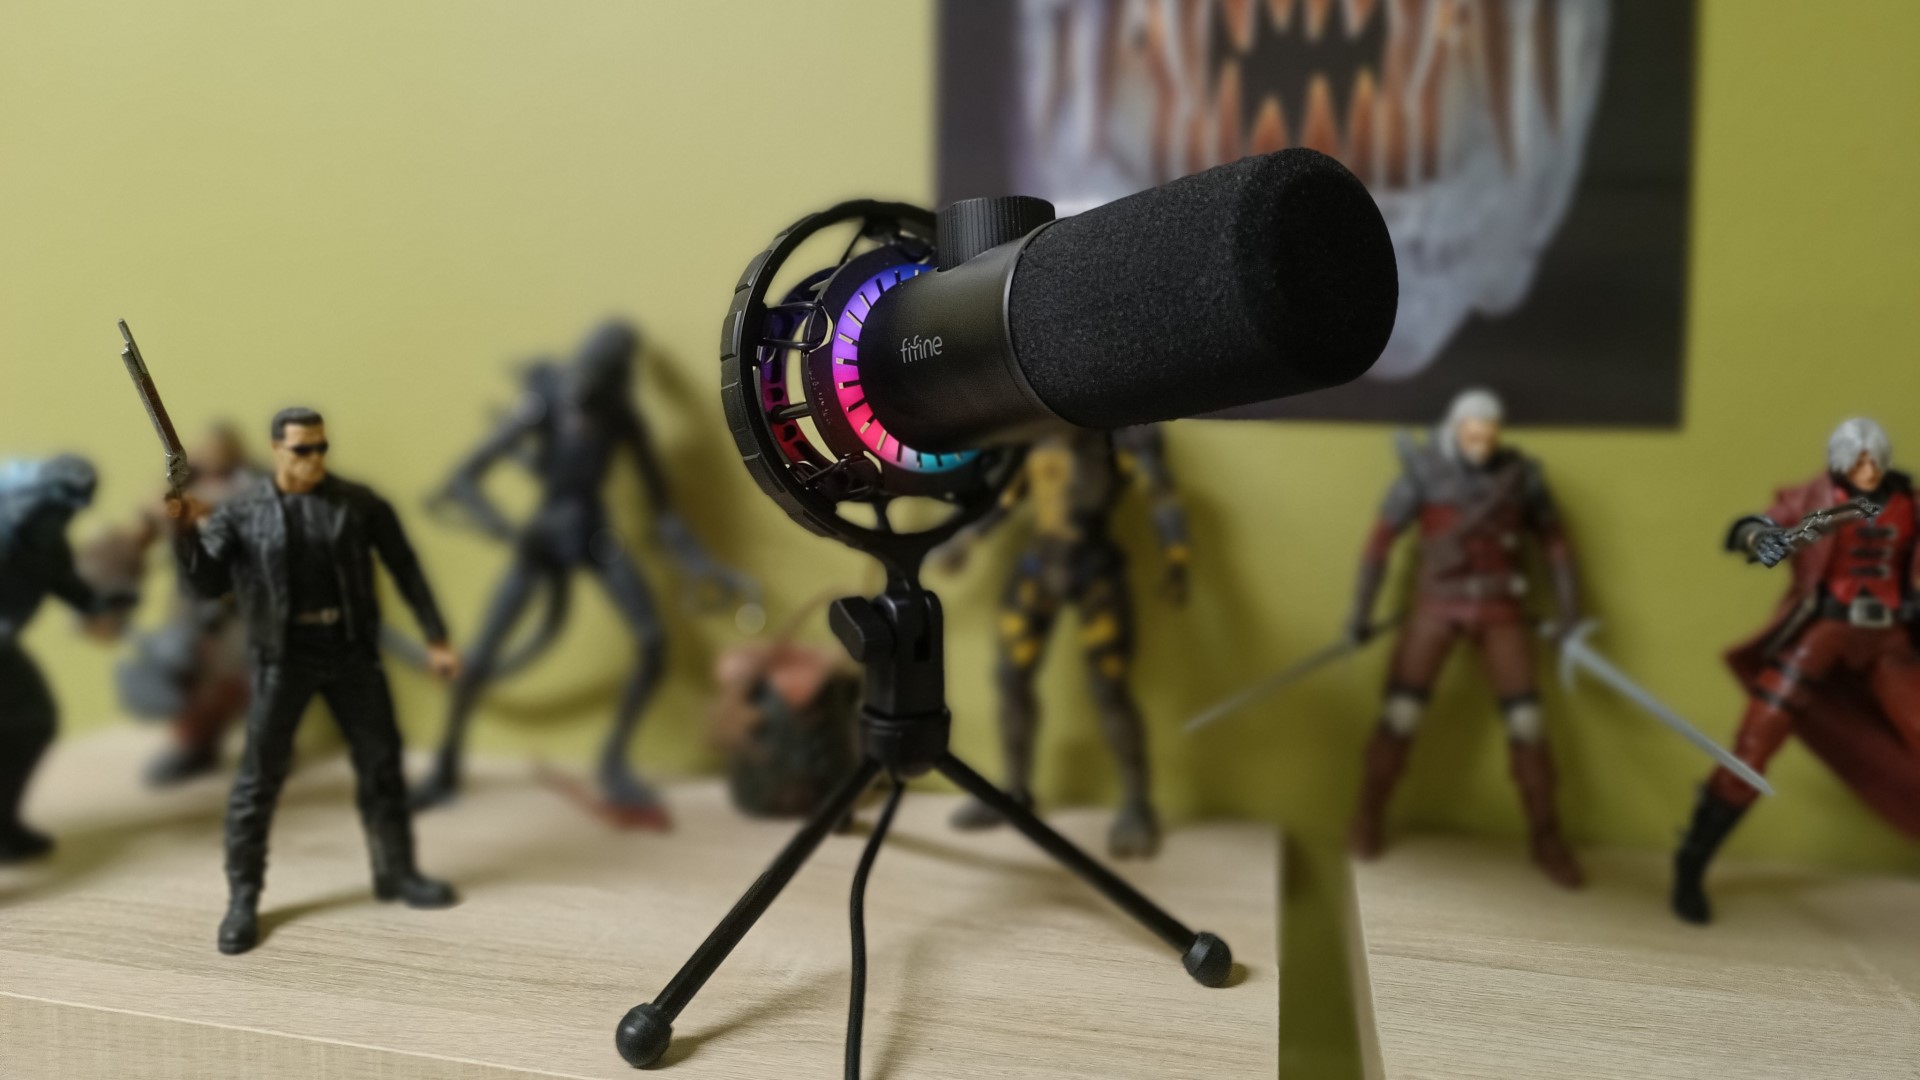 FIFINE K658 USB Dynamic Microphone - Best Streaming & Gaming